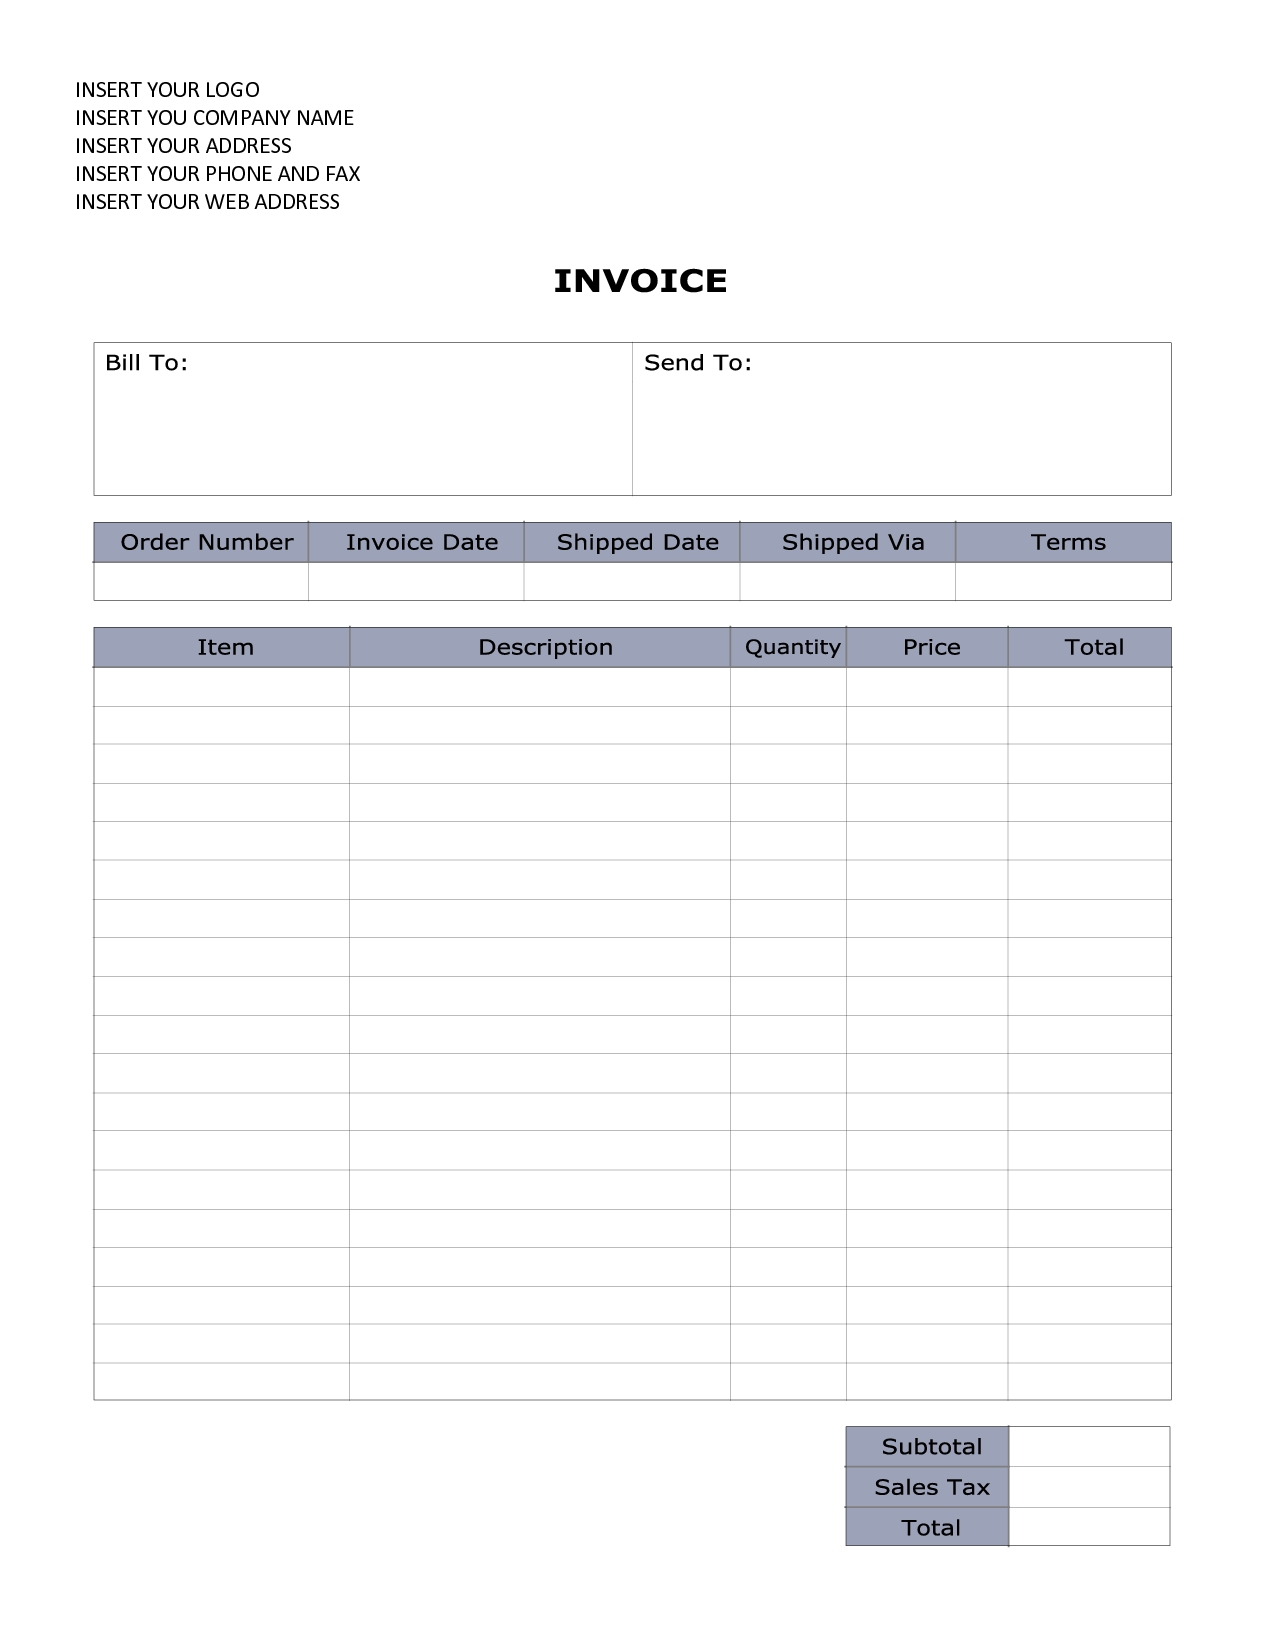 invoice sample in word word invoices microsoft word invoice template 2010 all about 1275 X 1650